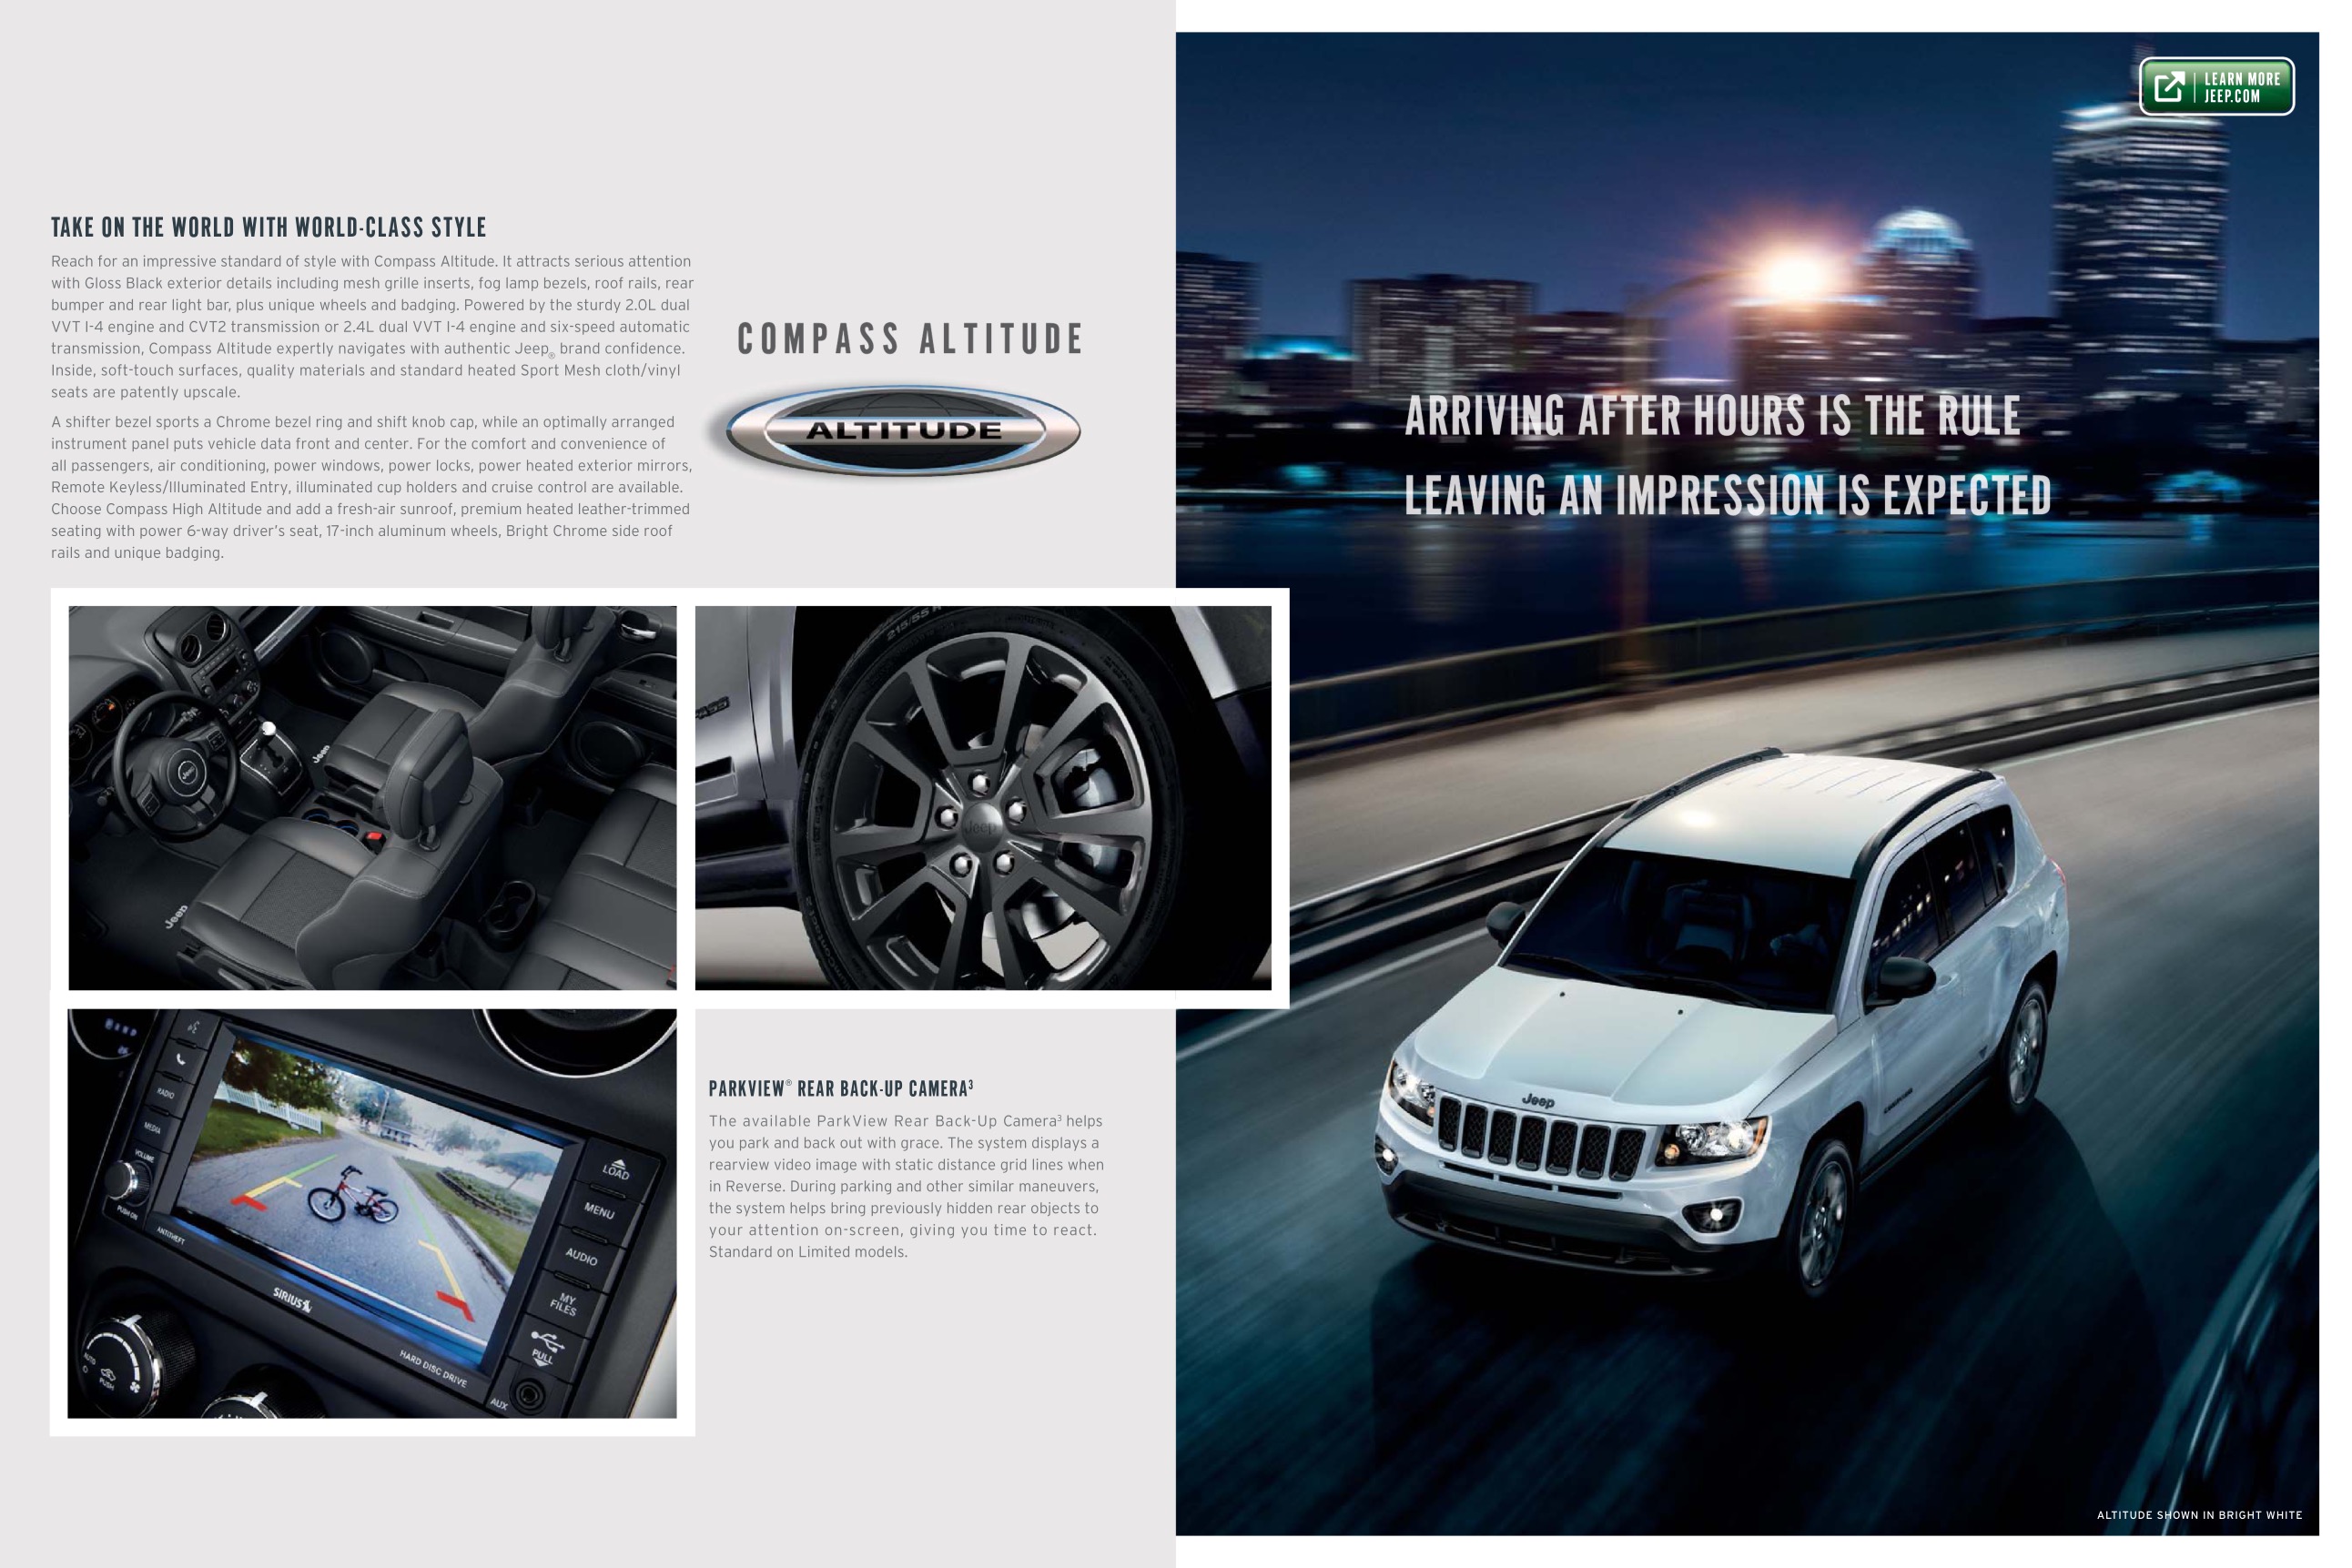 2015 Jeep Compass Brochure Page 6